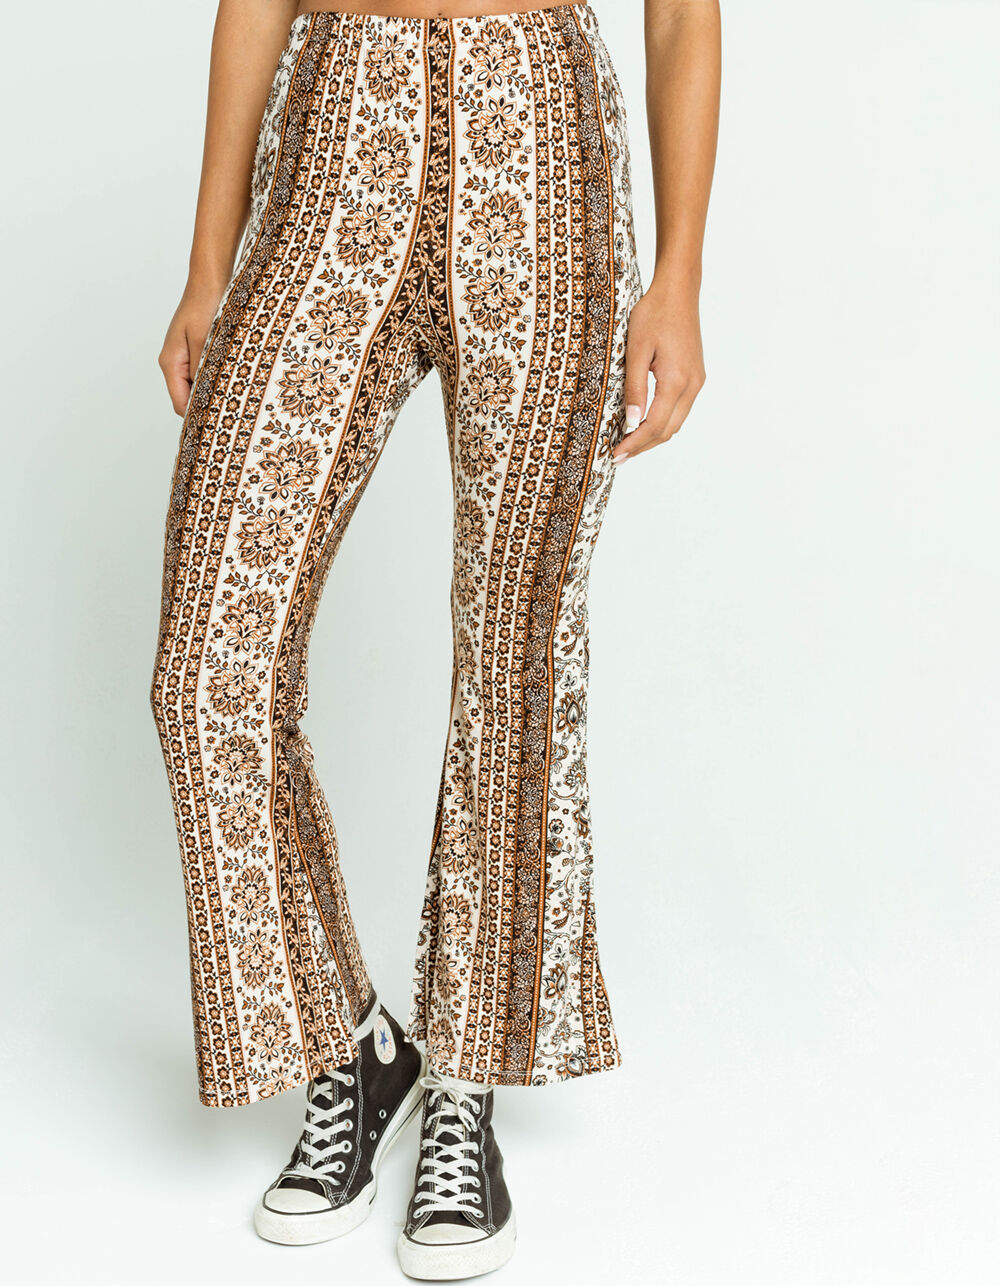 WEST OF MELROSE All Is Flare Womens Pants - MULTI | Tillys